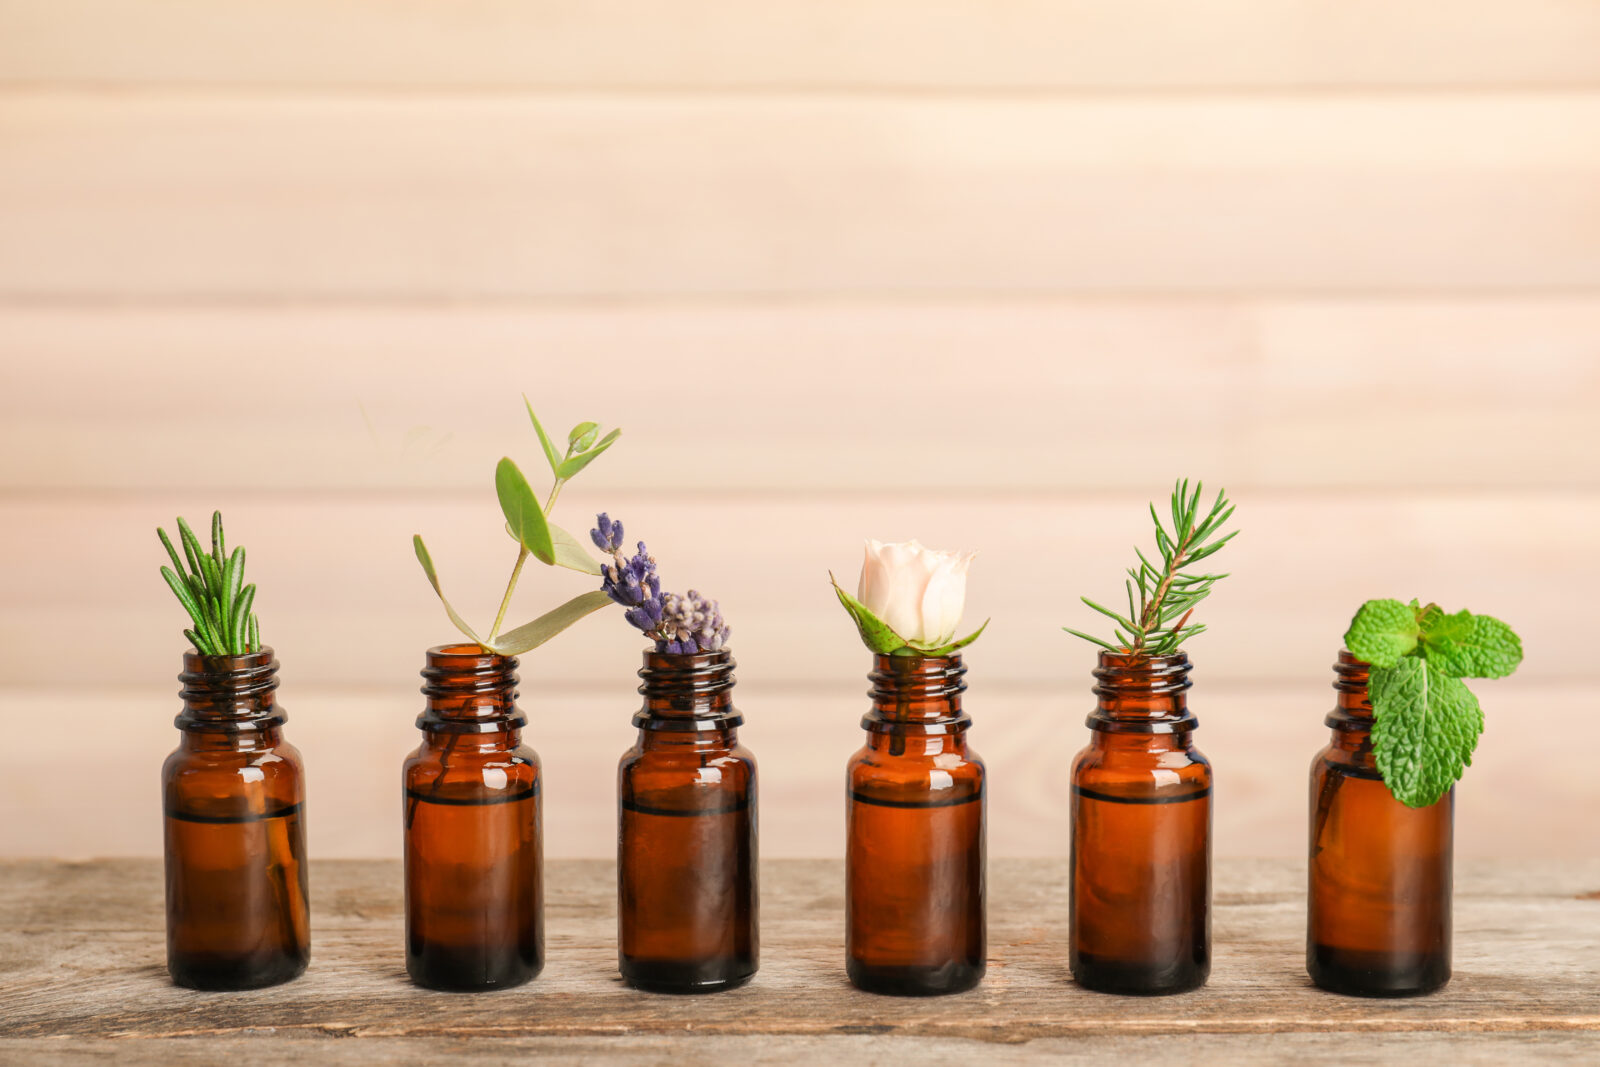 Glass bottles with different essential oils and herbs on wooden background